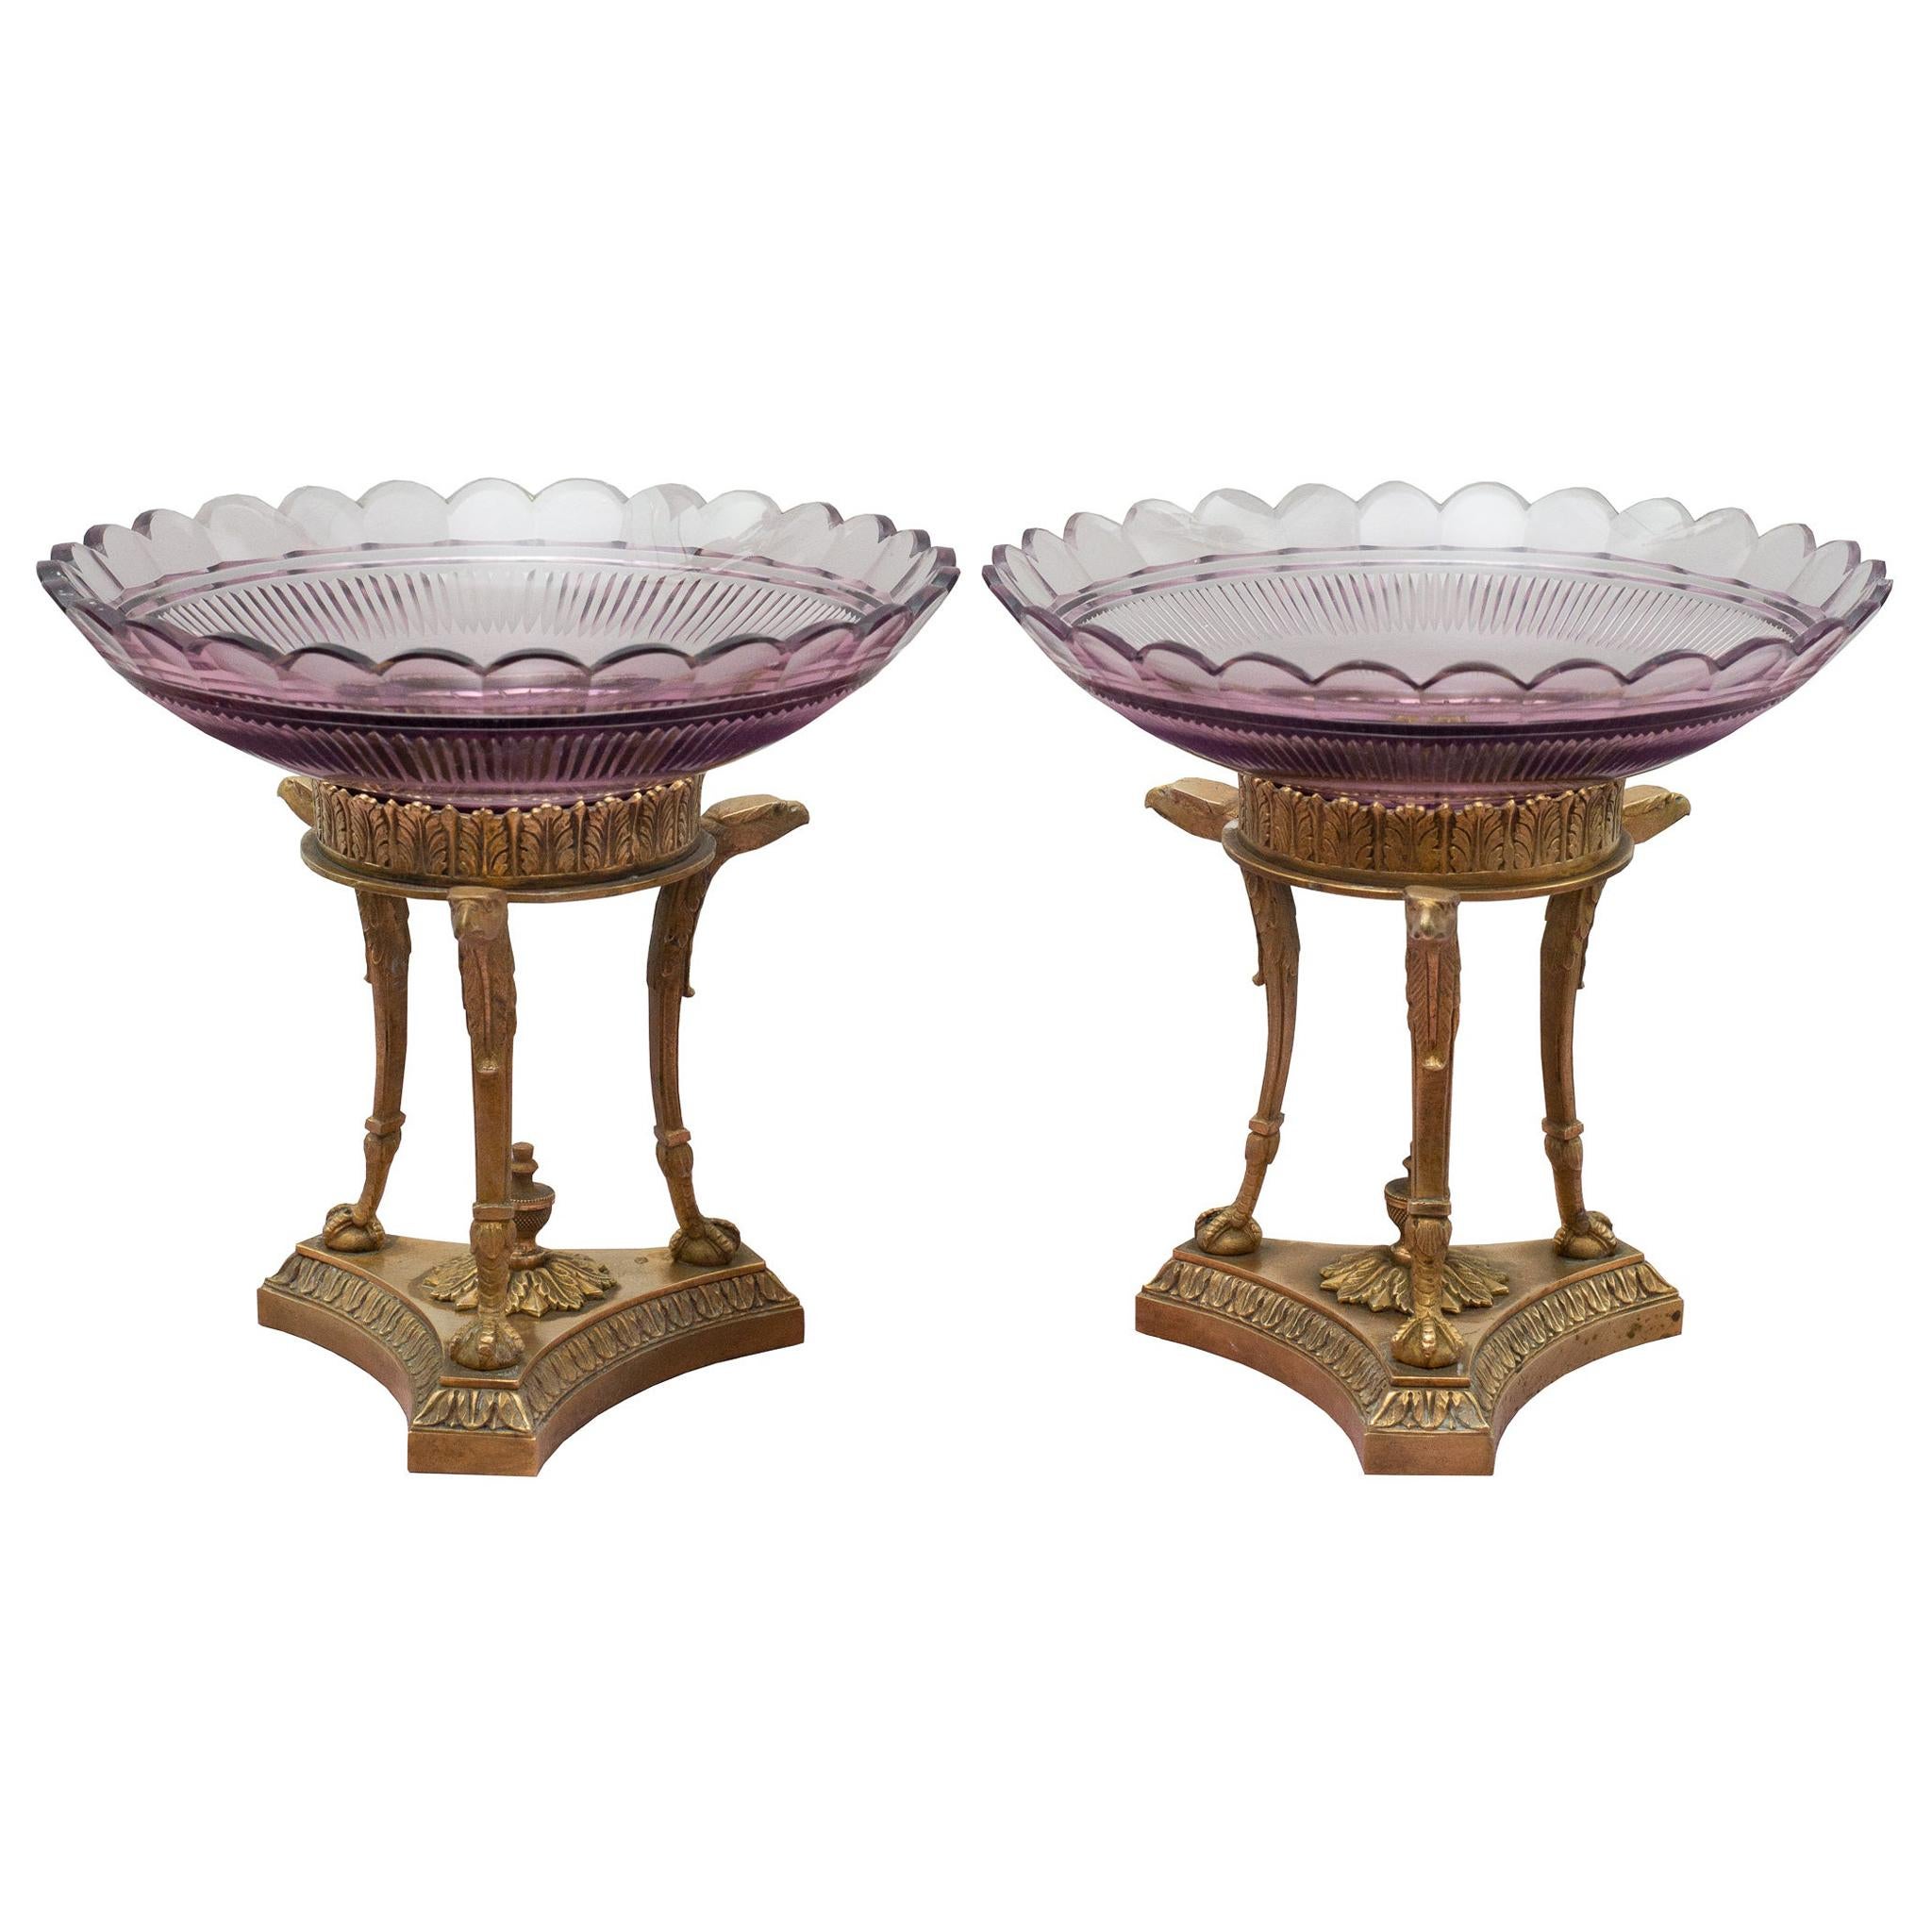 Antique Pair of French Purple Cut Crystal & Bronze Compotes / Tazzas / Bowls